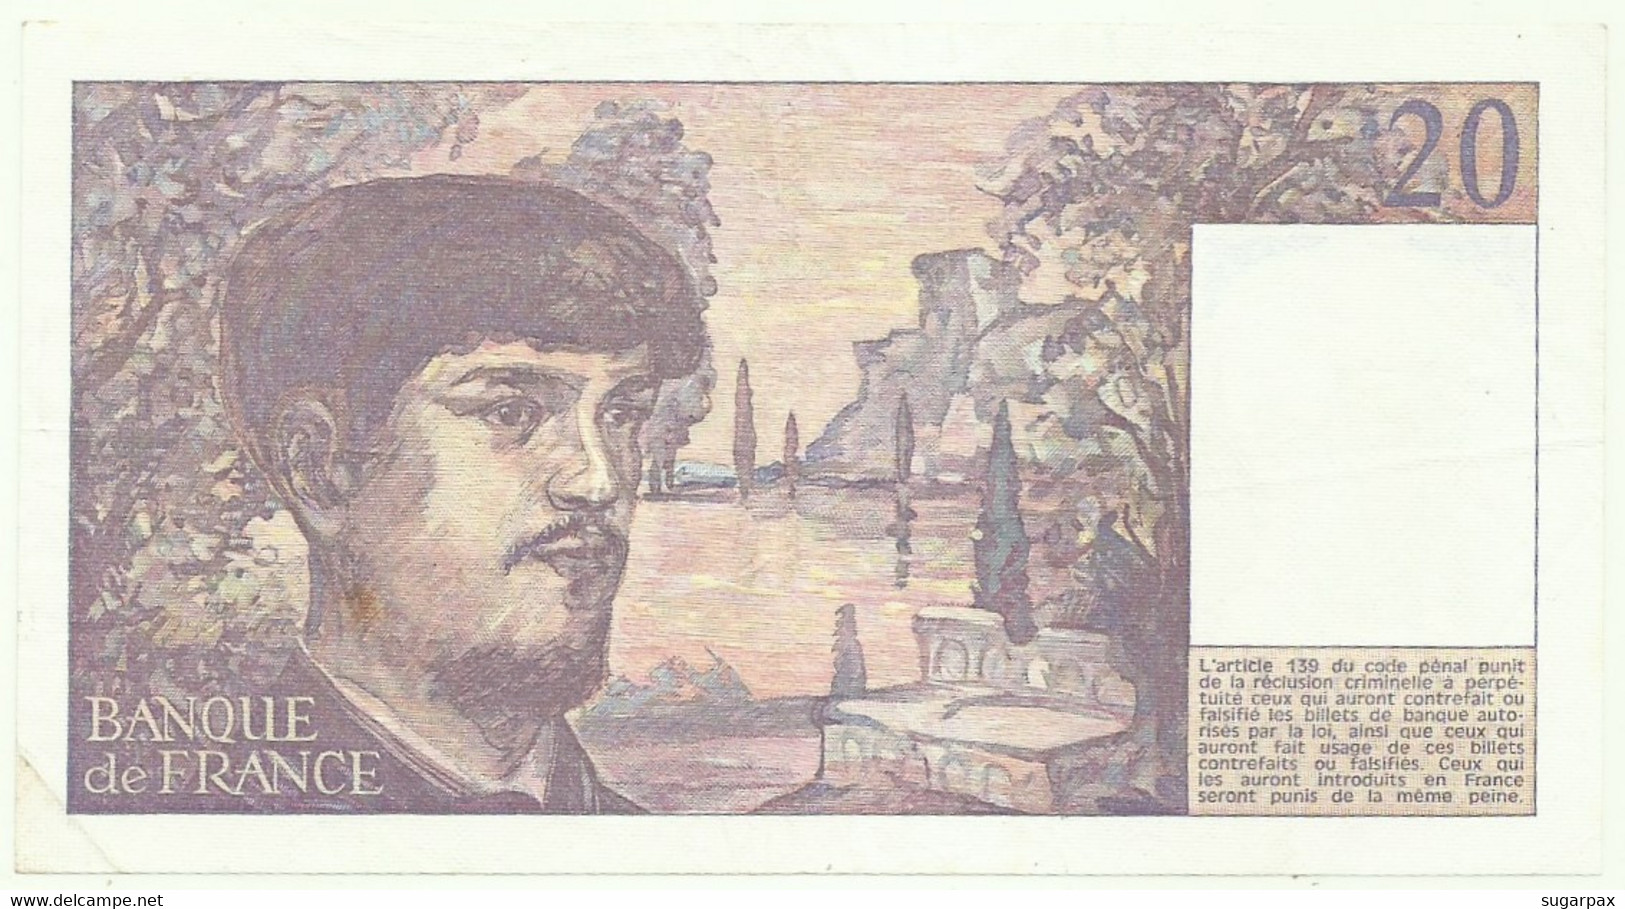 FRANCE - 20 Francs - 1980 - P 151.a - Serie G.003 - Claude Debussy - 20 F 1980-1997 ''Debussy''